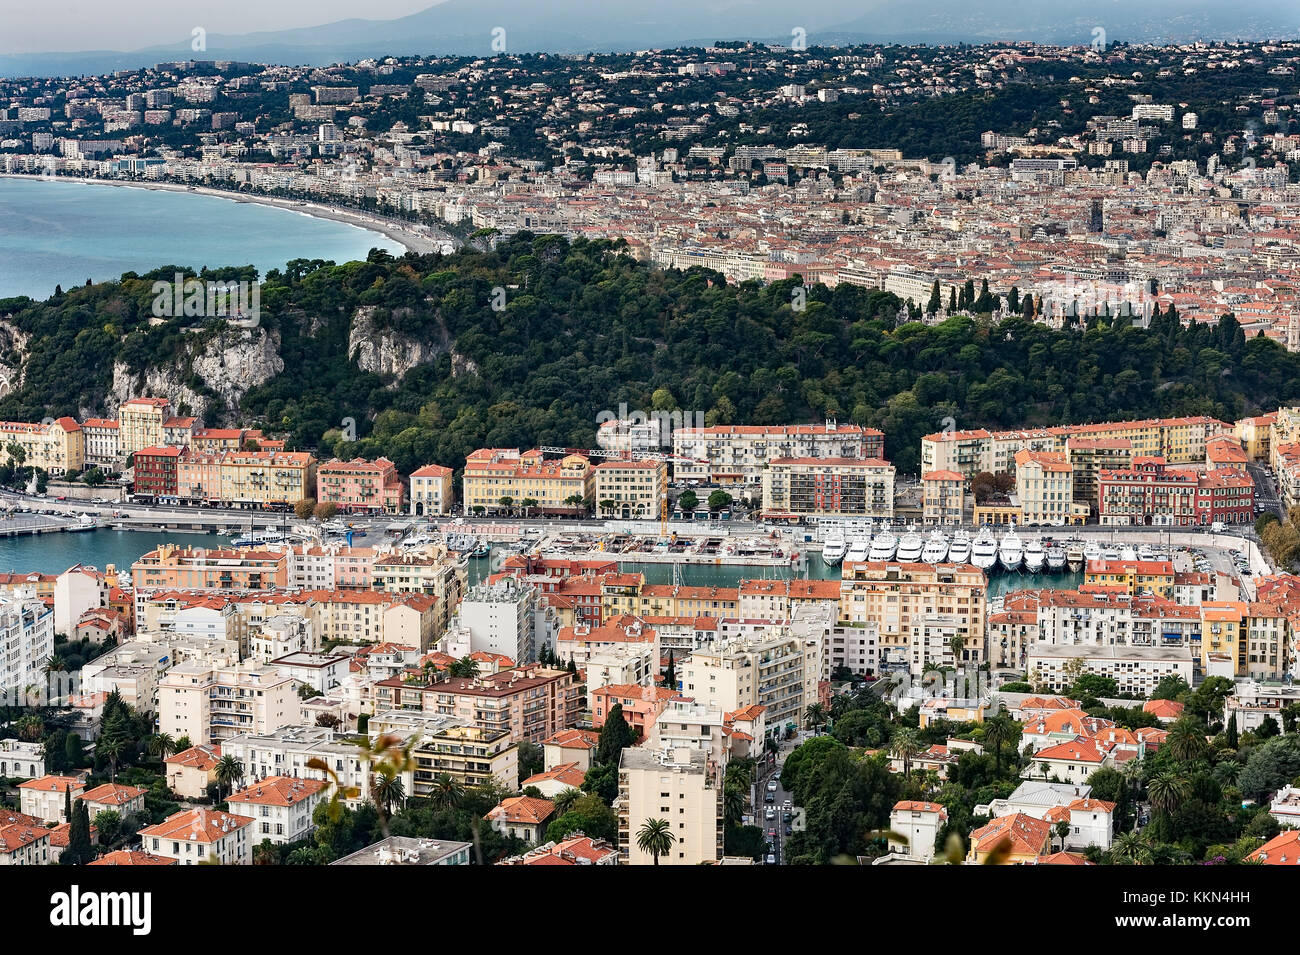 Aerial view of the French city of Nice, French Riviera, Côte d'Azur, France, Europe Stock Photo